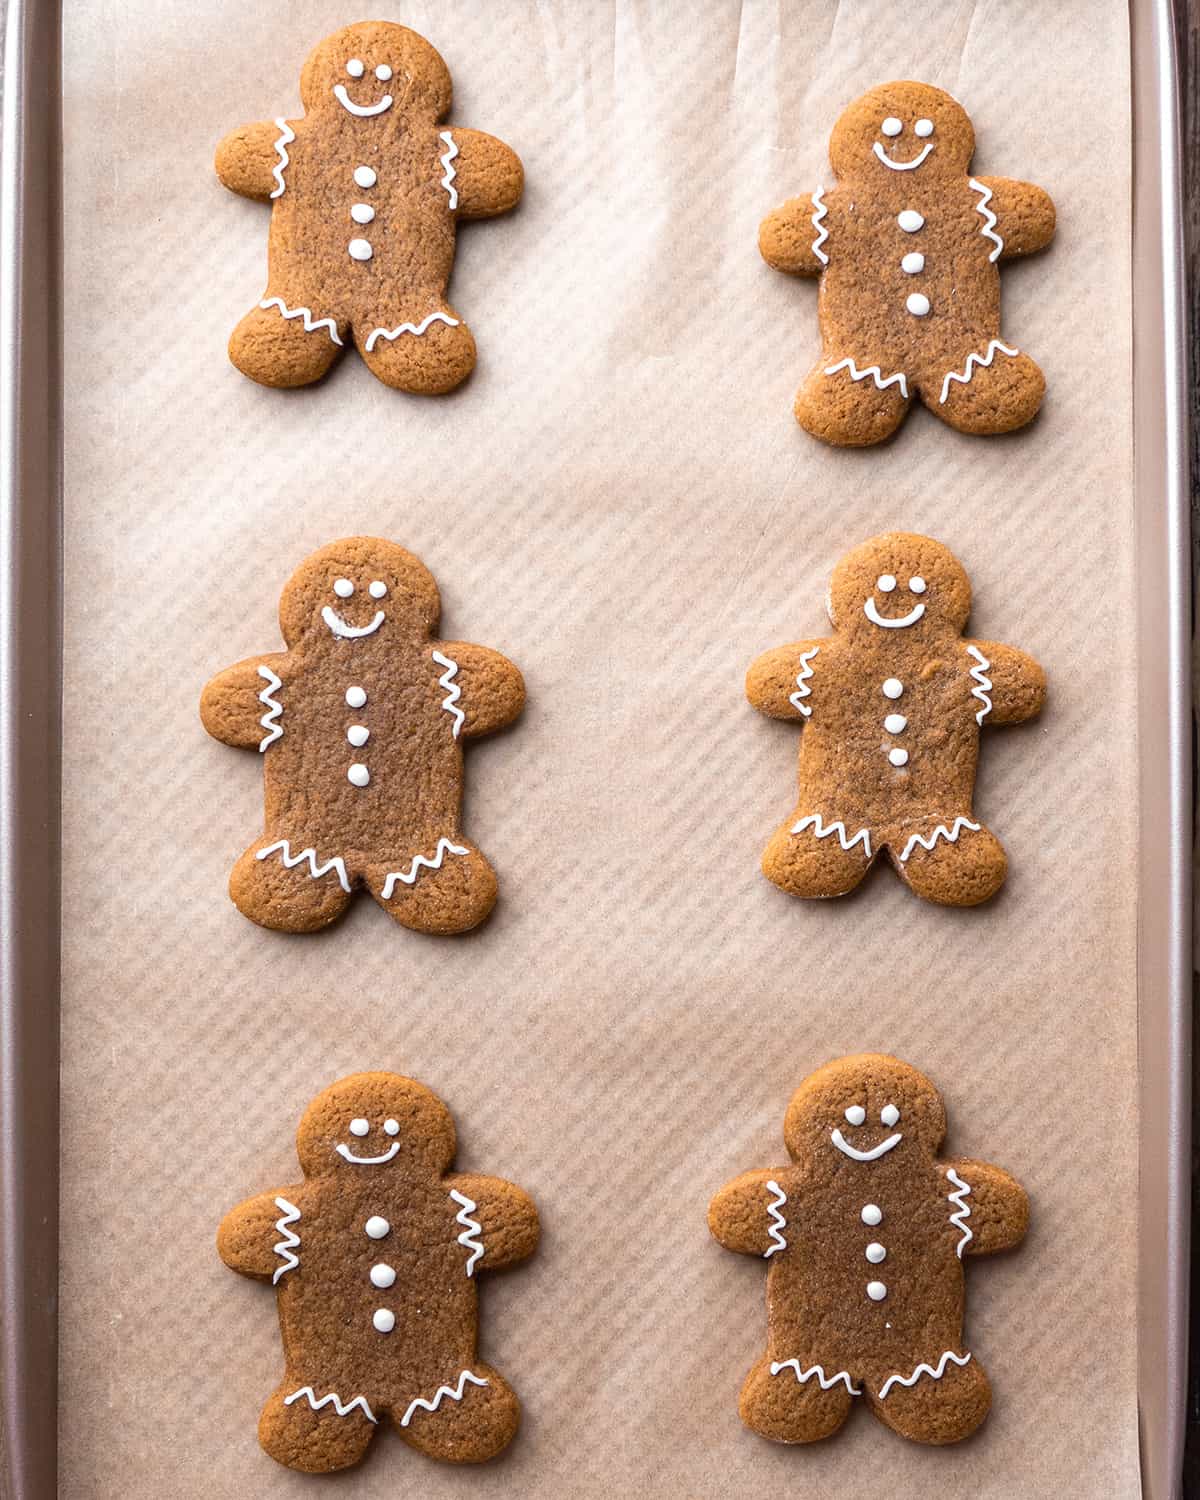 6 gingerbread men cookies on a baking sheet decorated with faces and buttons